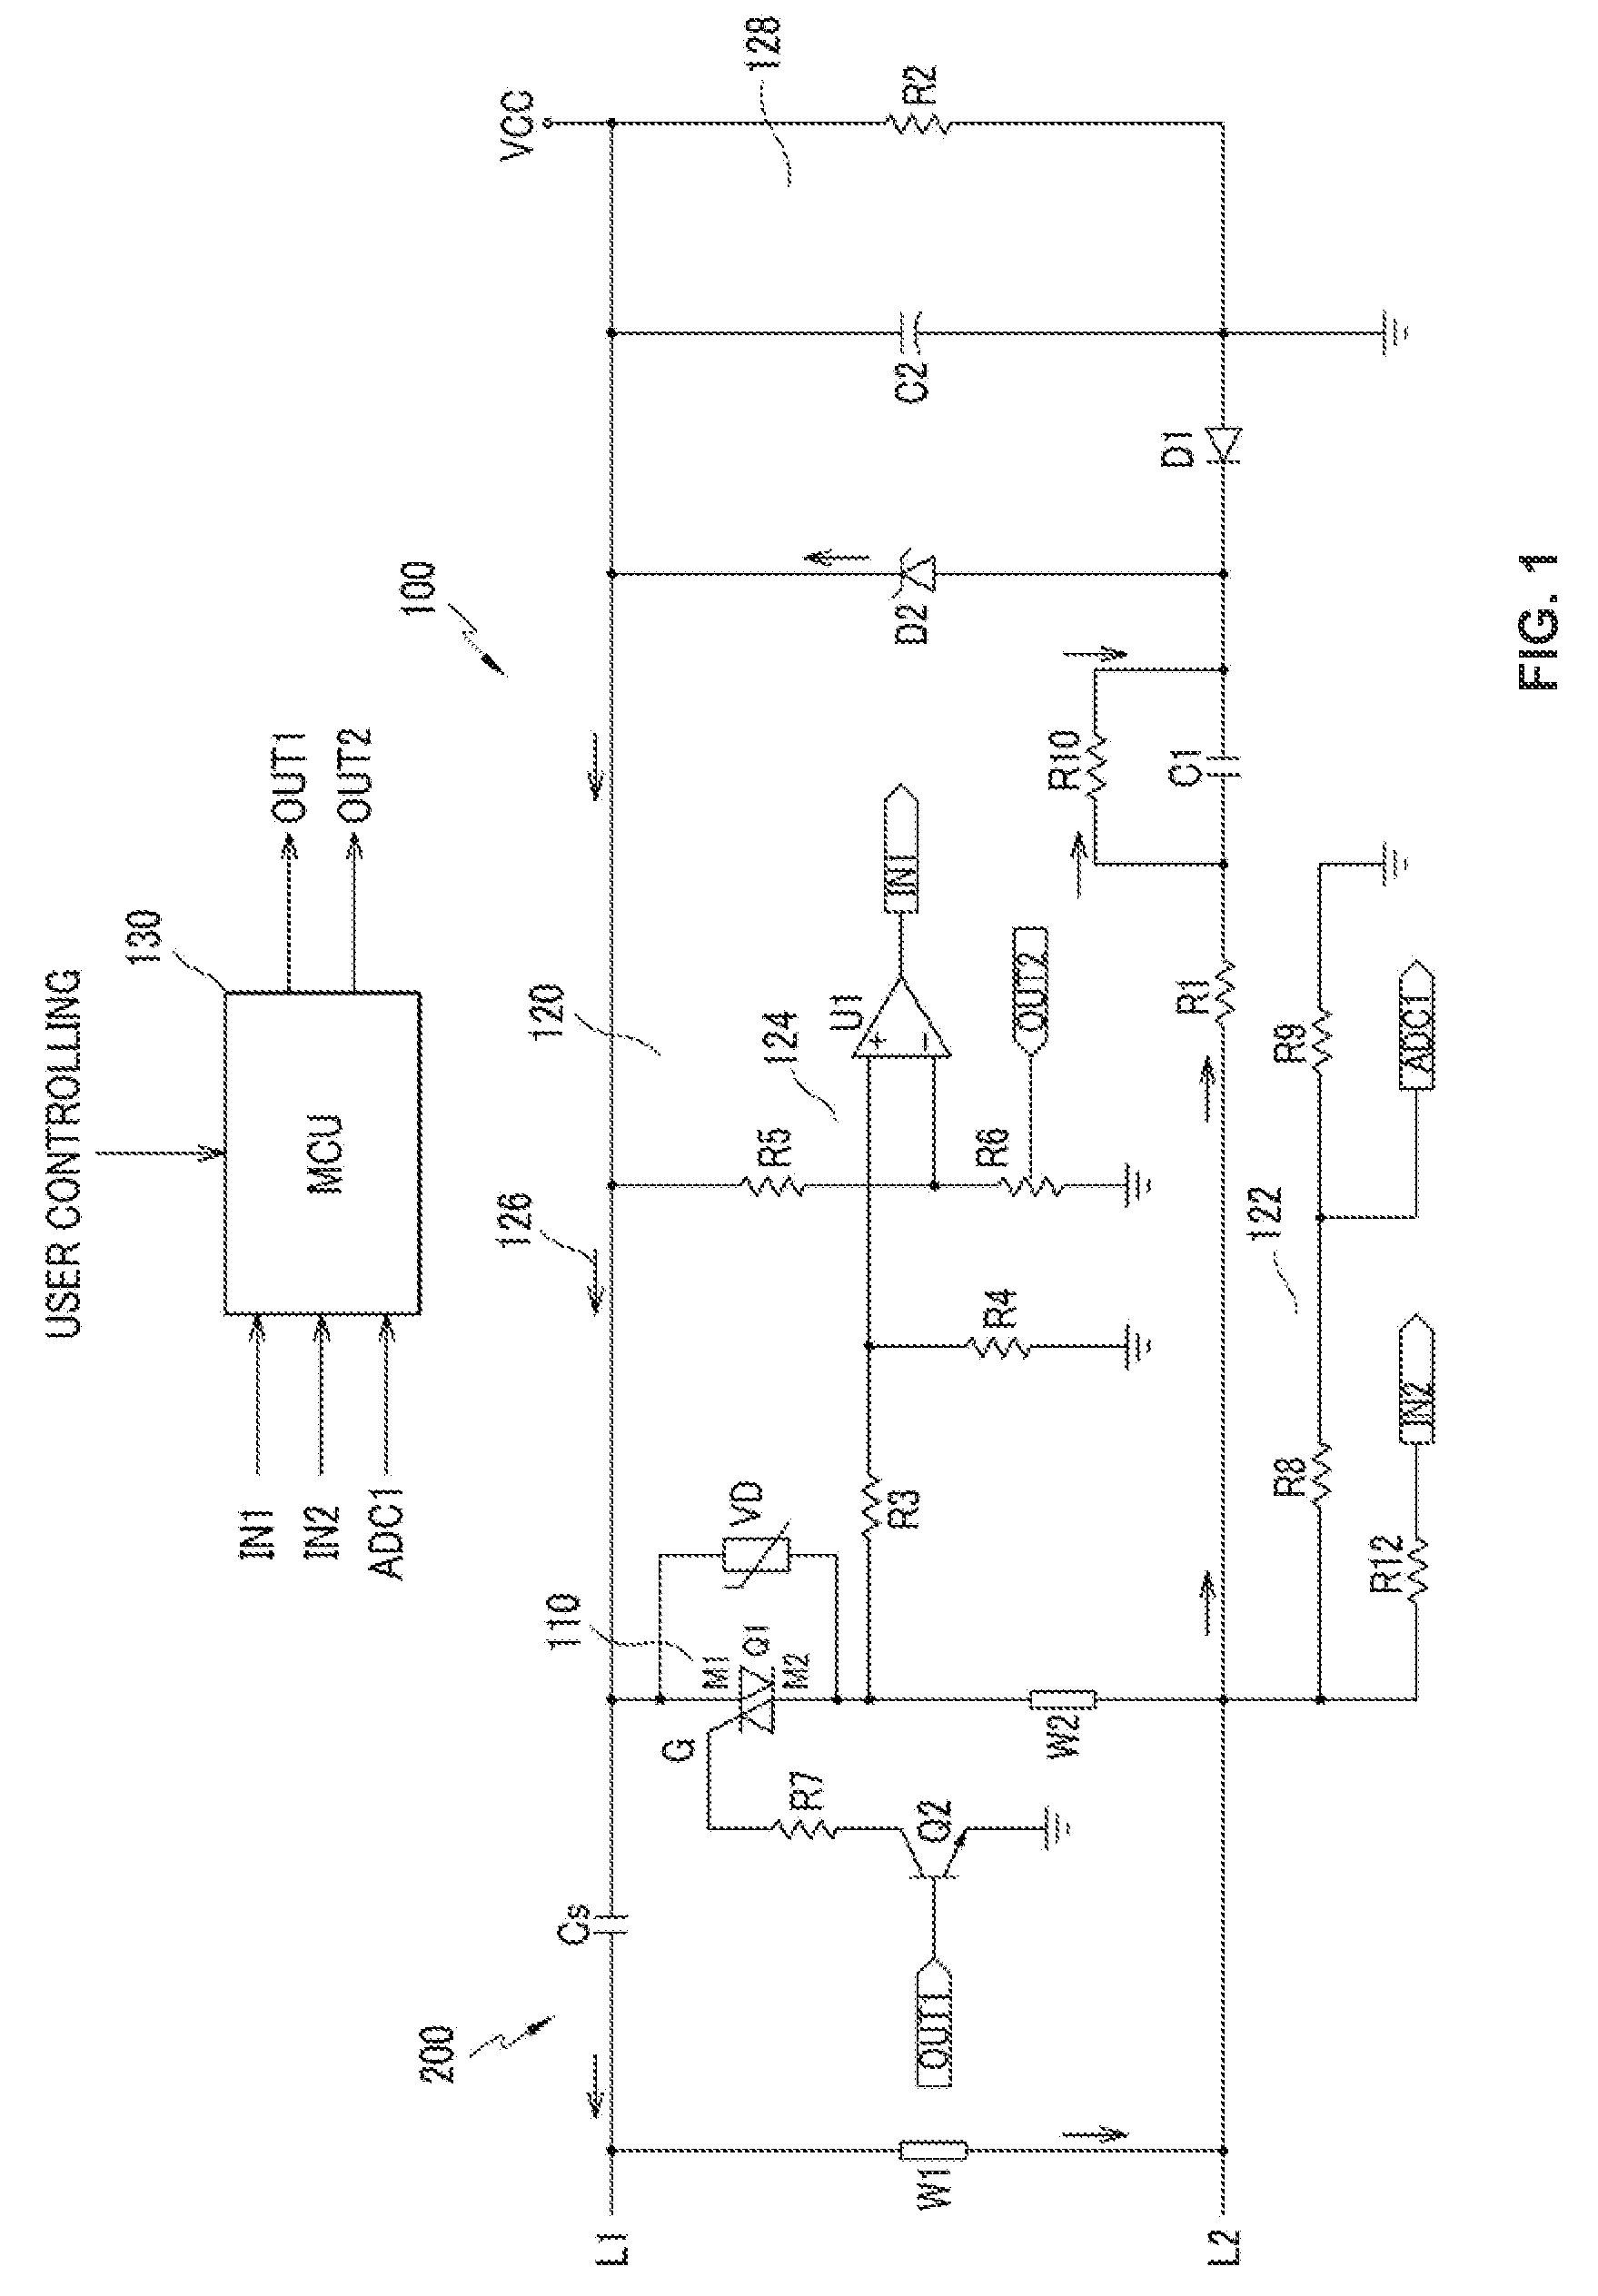 Method for starting single phase induction motor and electronic relay using the same